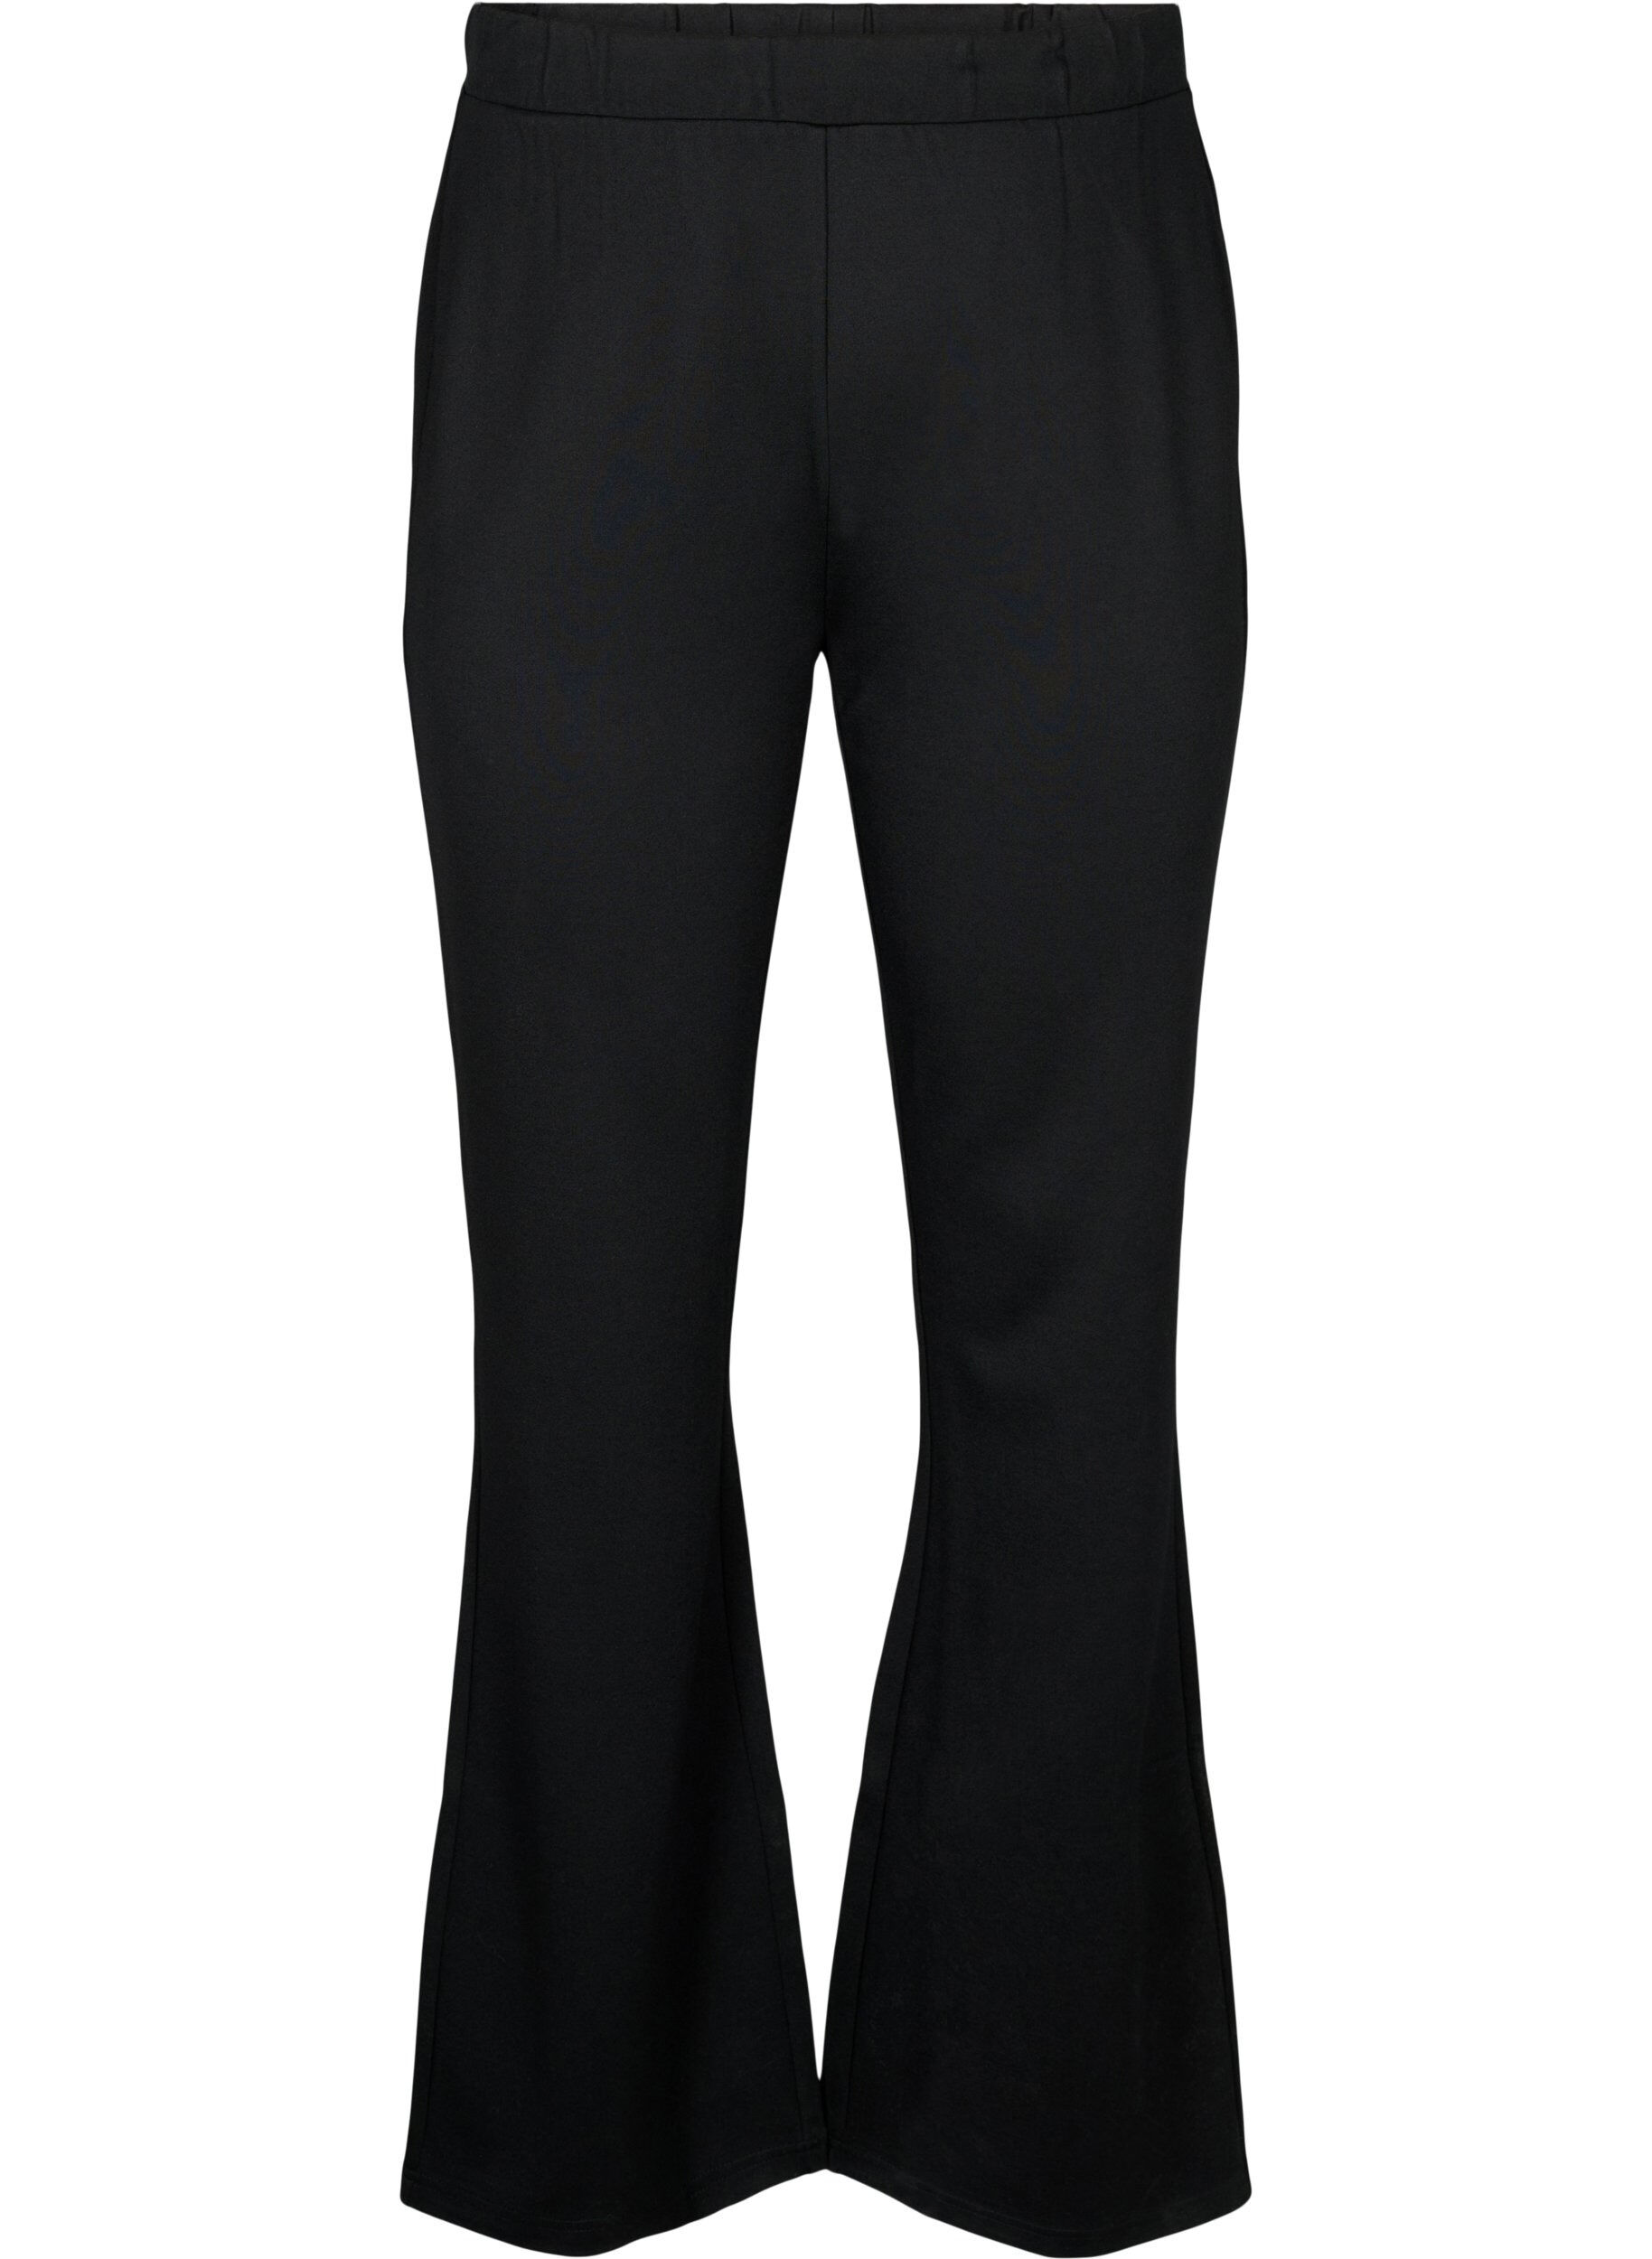 Black Bootcut Trousers | Nife | SilkFred US